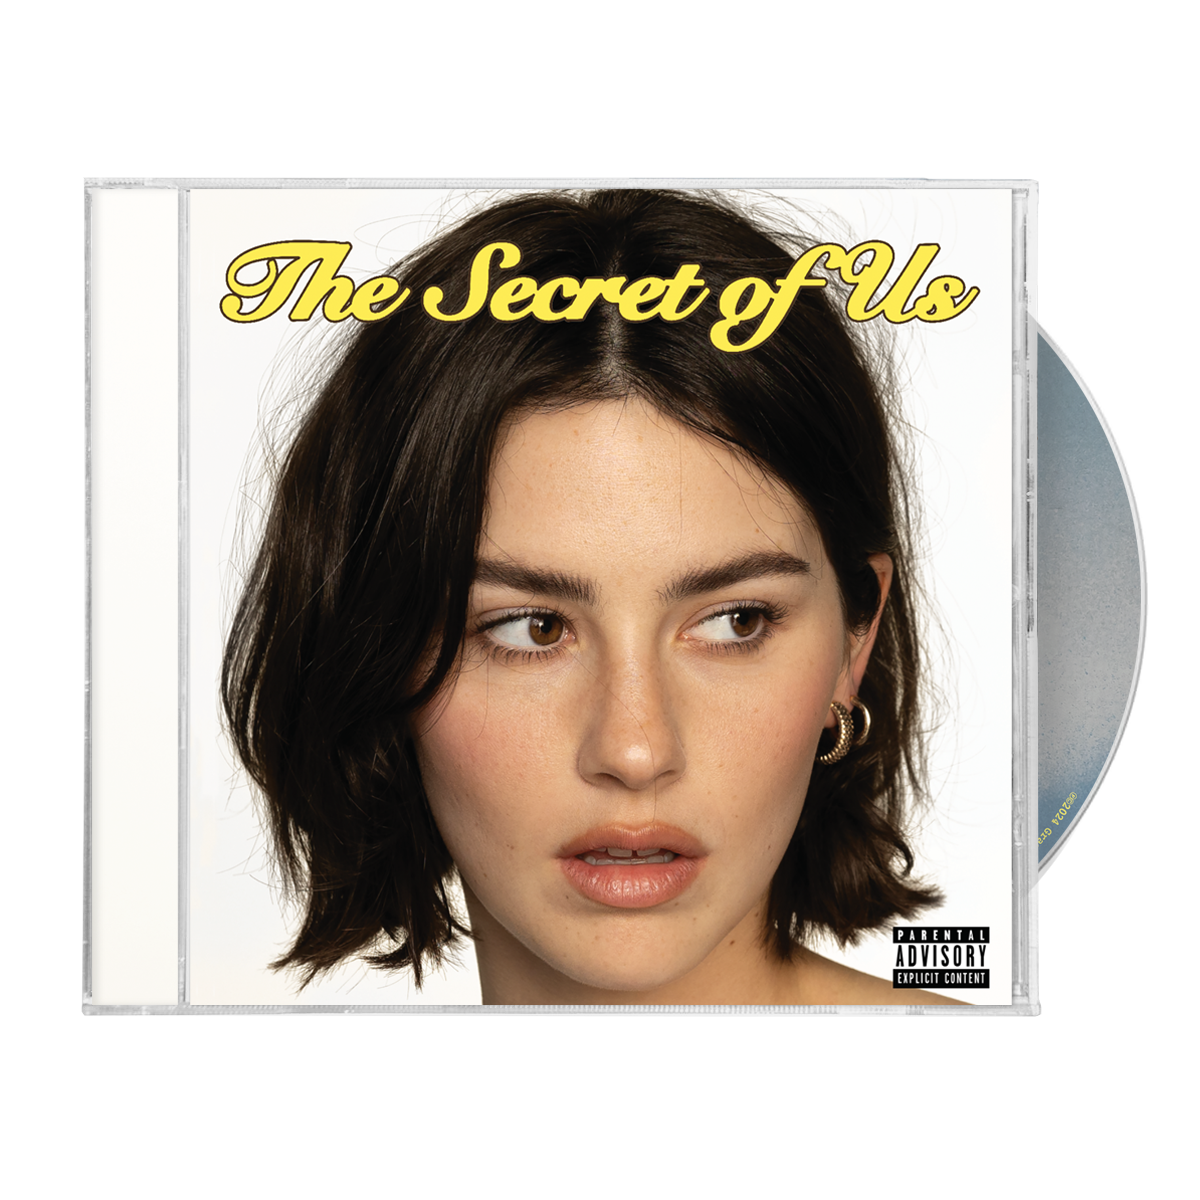 The Secret Of Us: Limited Yellow LP, Pink LP, CD + Signed Art Card